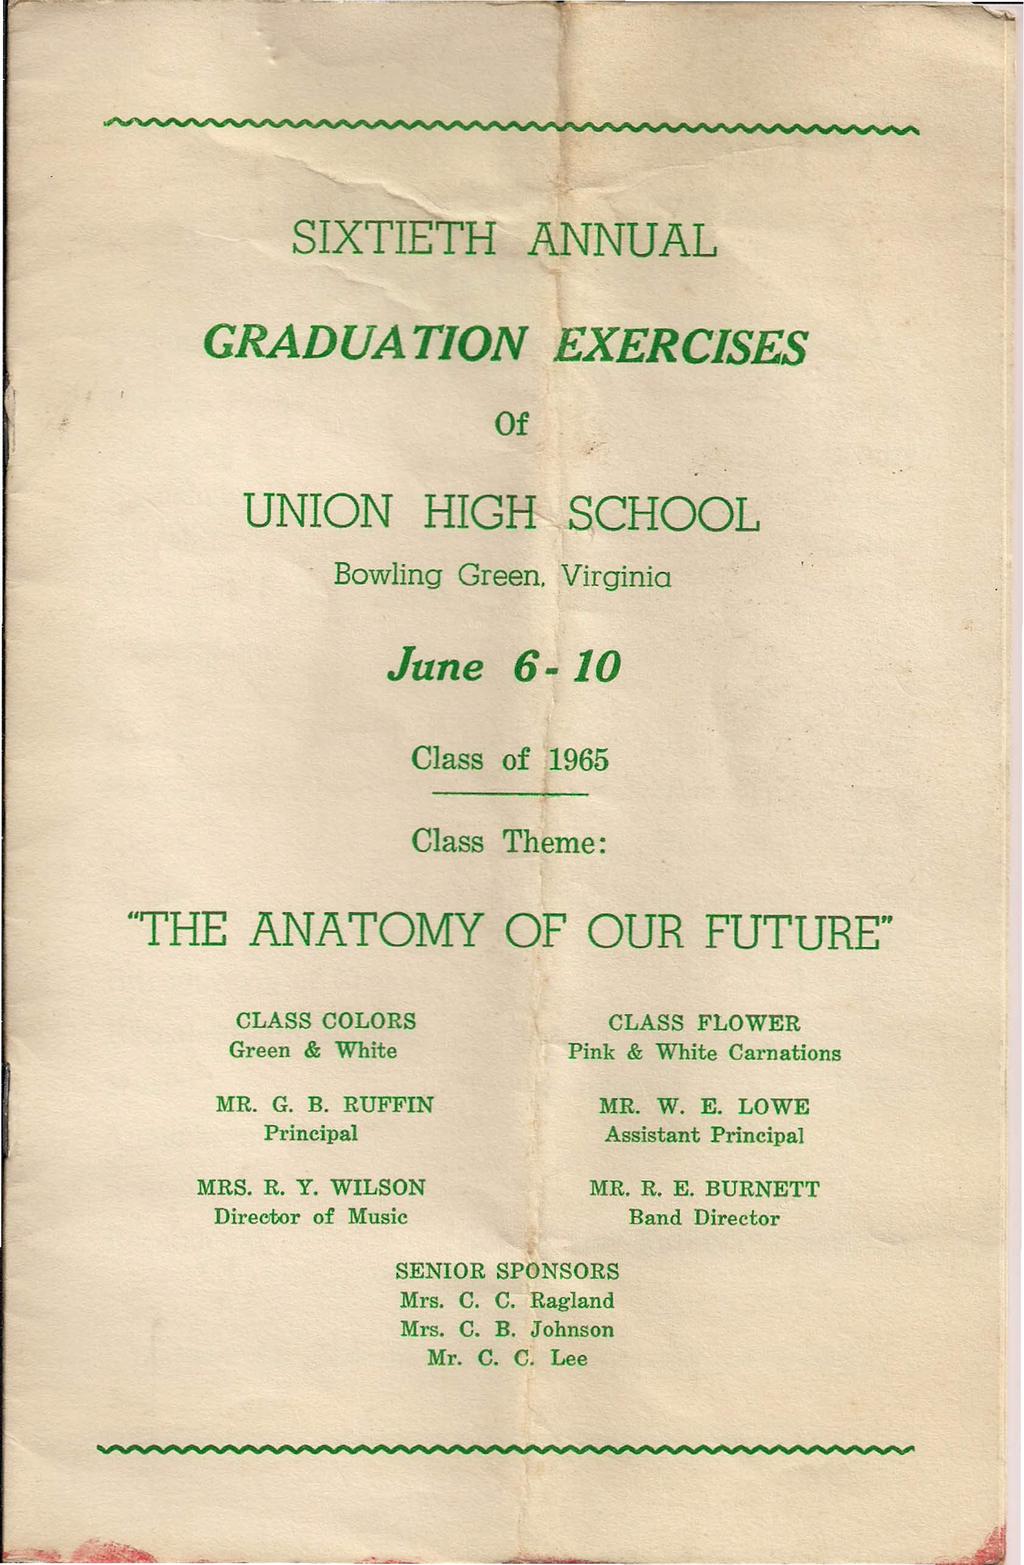 SIXTIETH GRADUATION ANNUAL EXERCISES Of UNION HIGH SCHOOL Bowling Green. June 6-10 Class of 1965 Class Theme: lithe ANATOMY OF OUR FUTURE" CLASS COLORS Green & White MR. G. B. RUFFIN Principal MRS. R. Y.